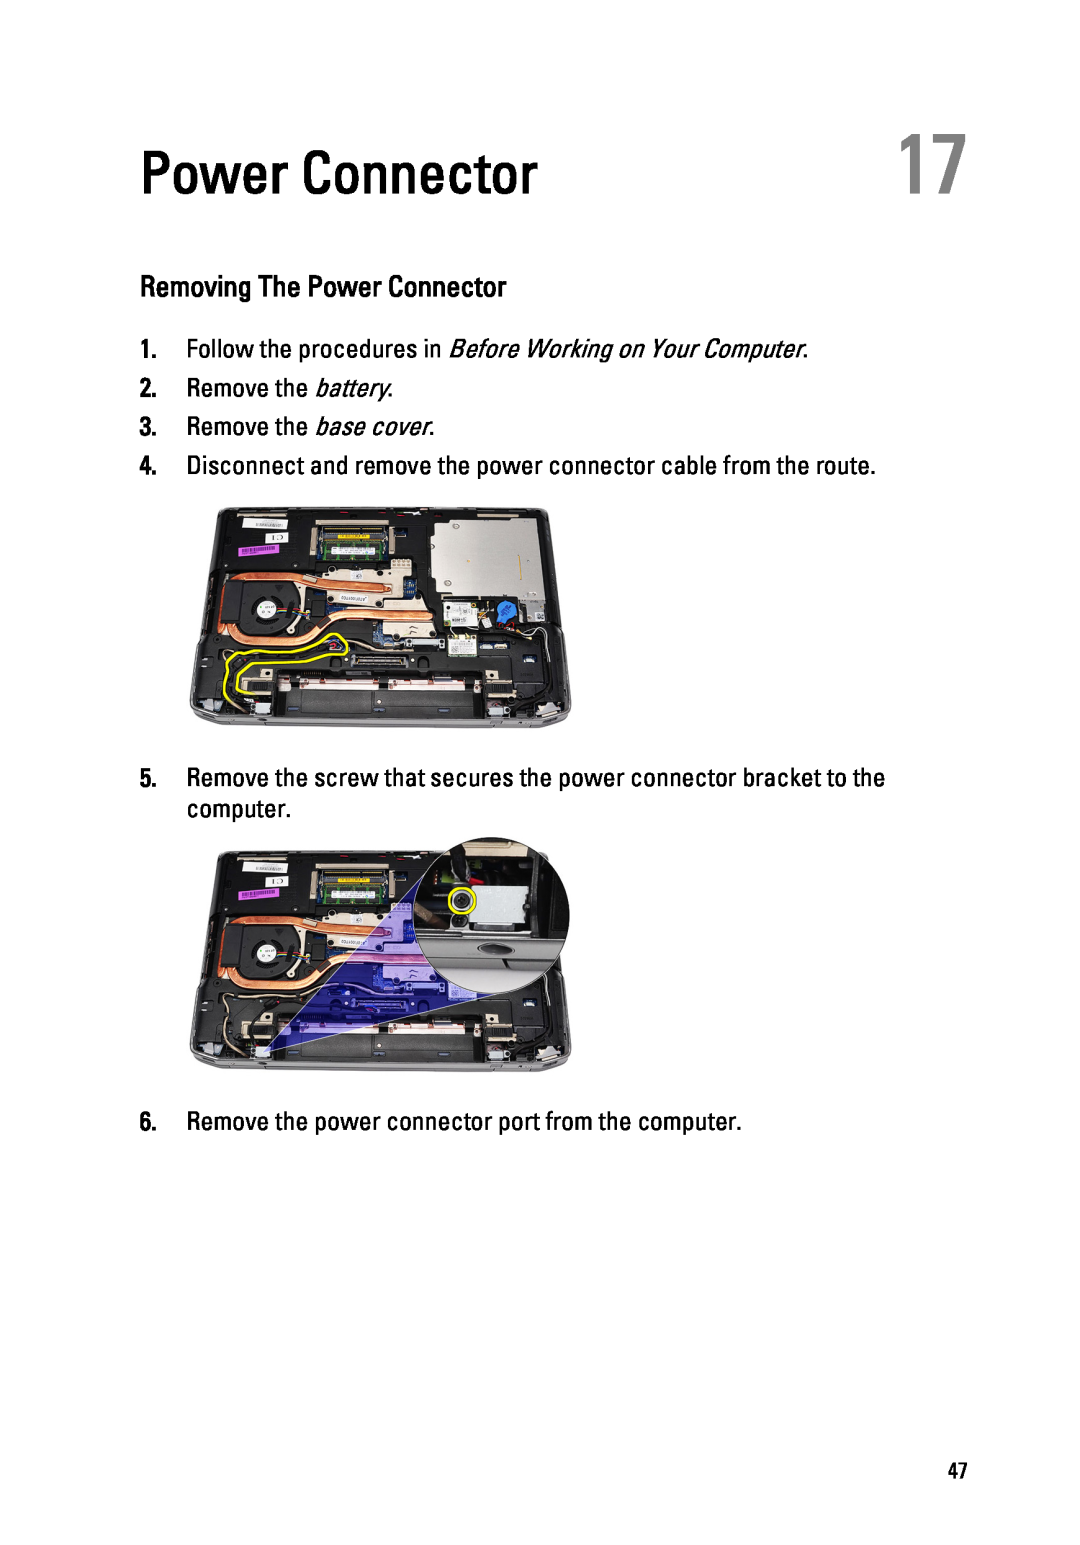 Dell E6520 owner manual Removing The Power Connector, Disconnect and remove the power connector cable from the route 